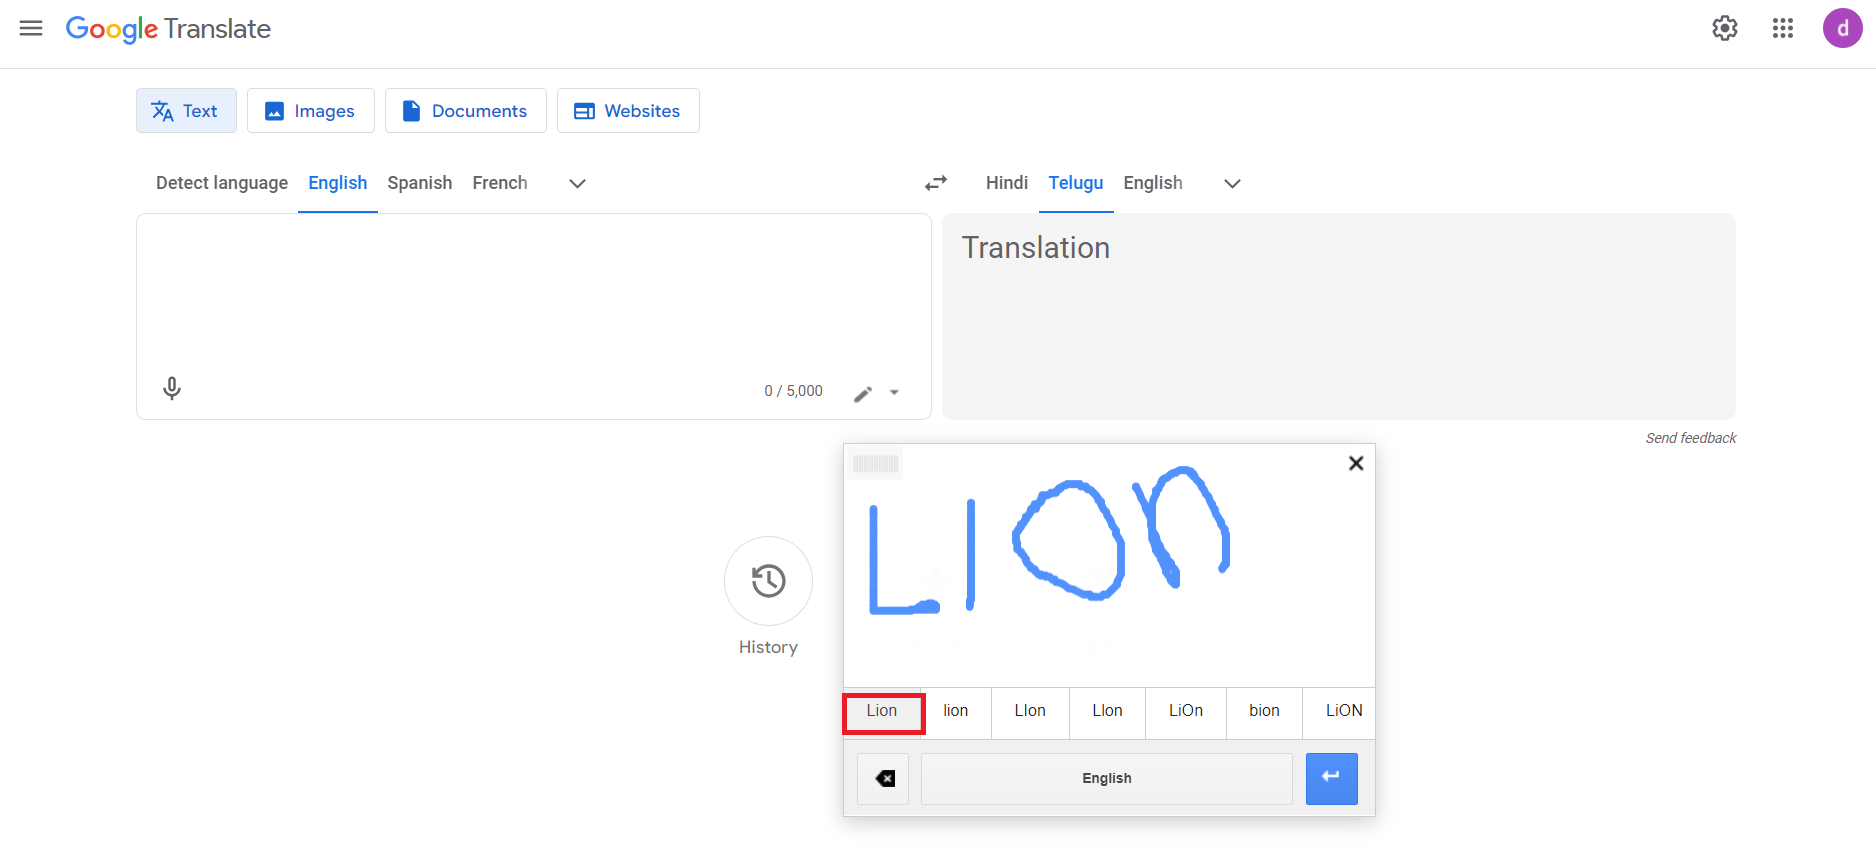 How to Use Google Translate on Android, Computer